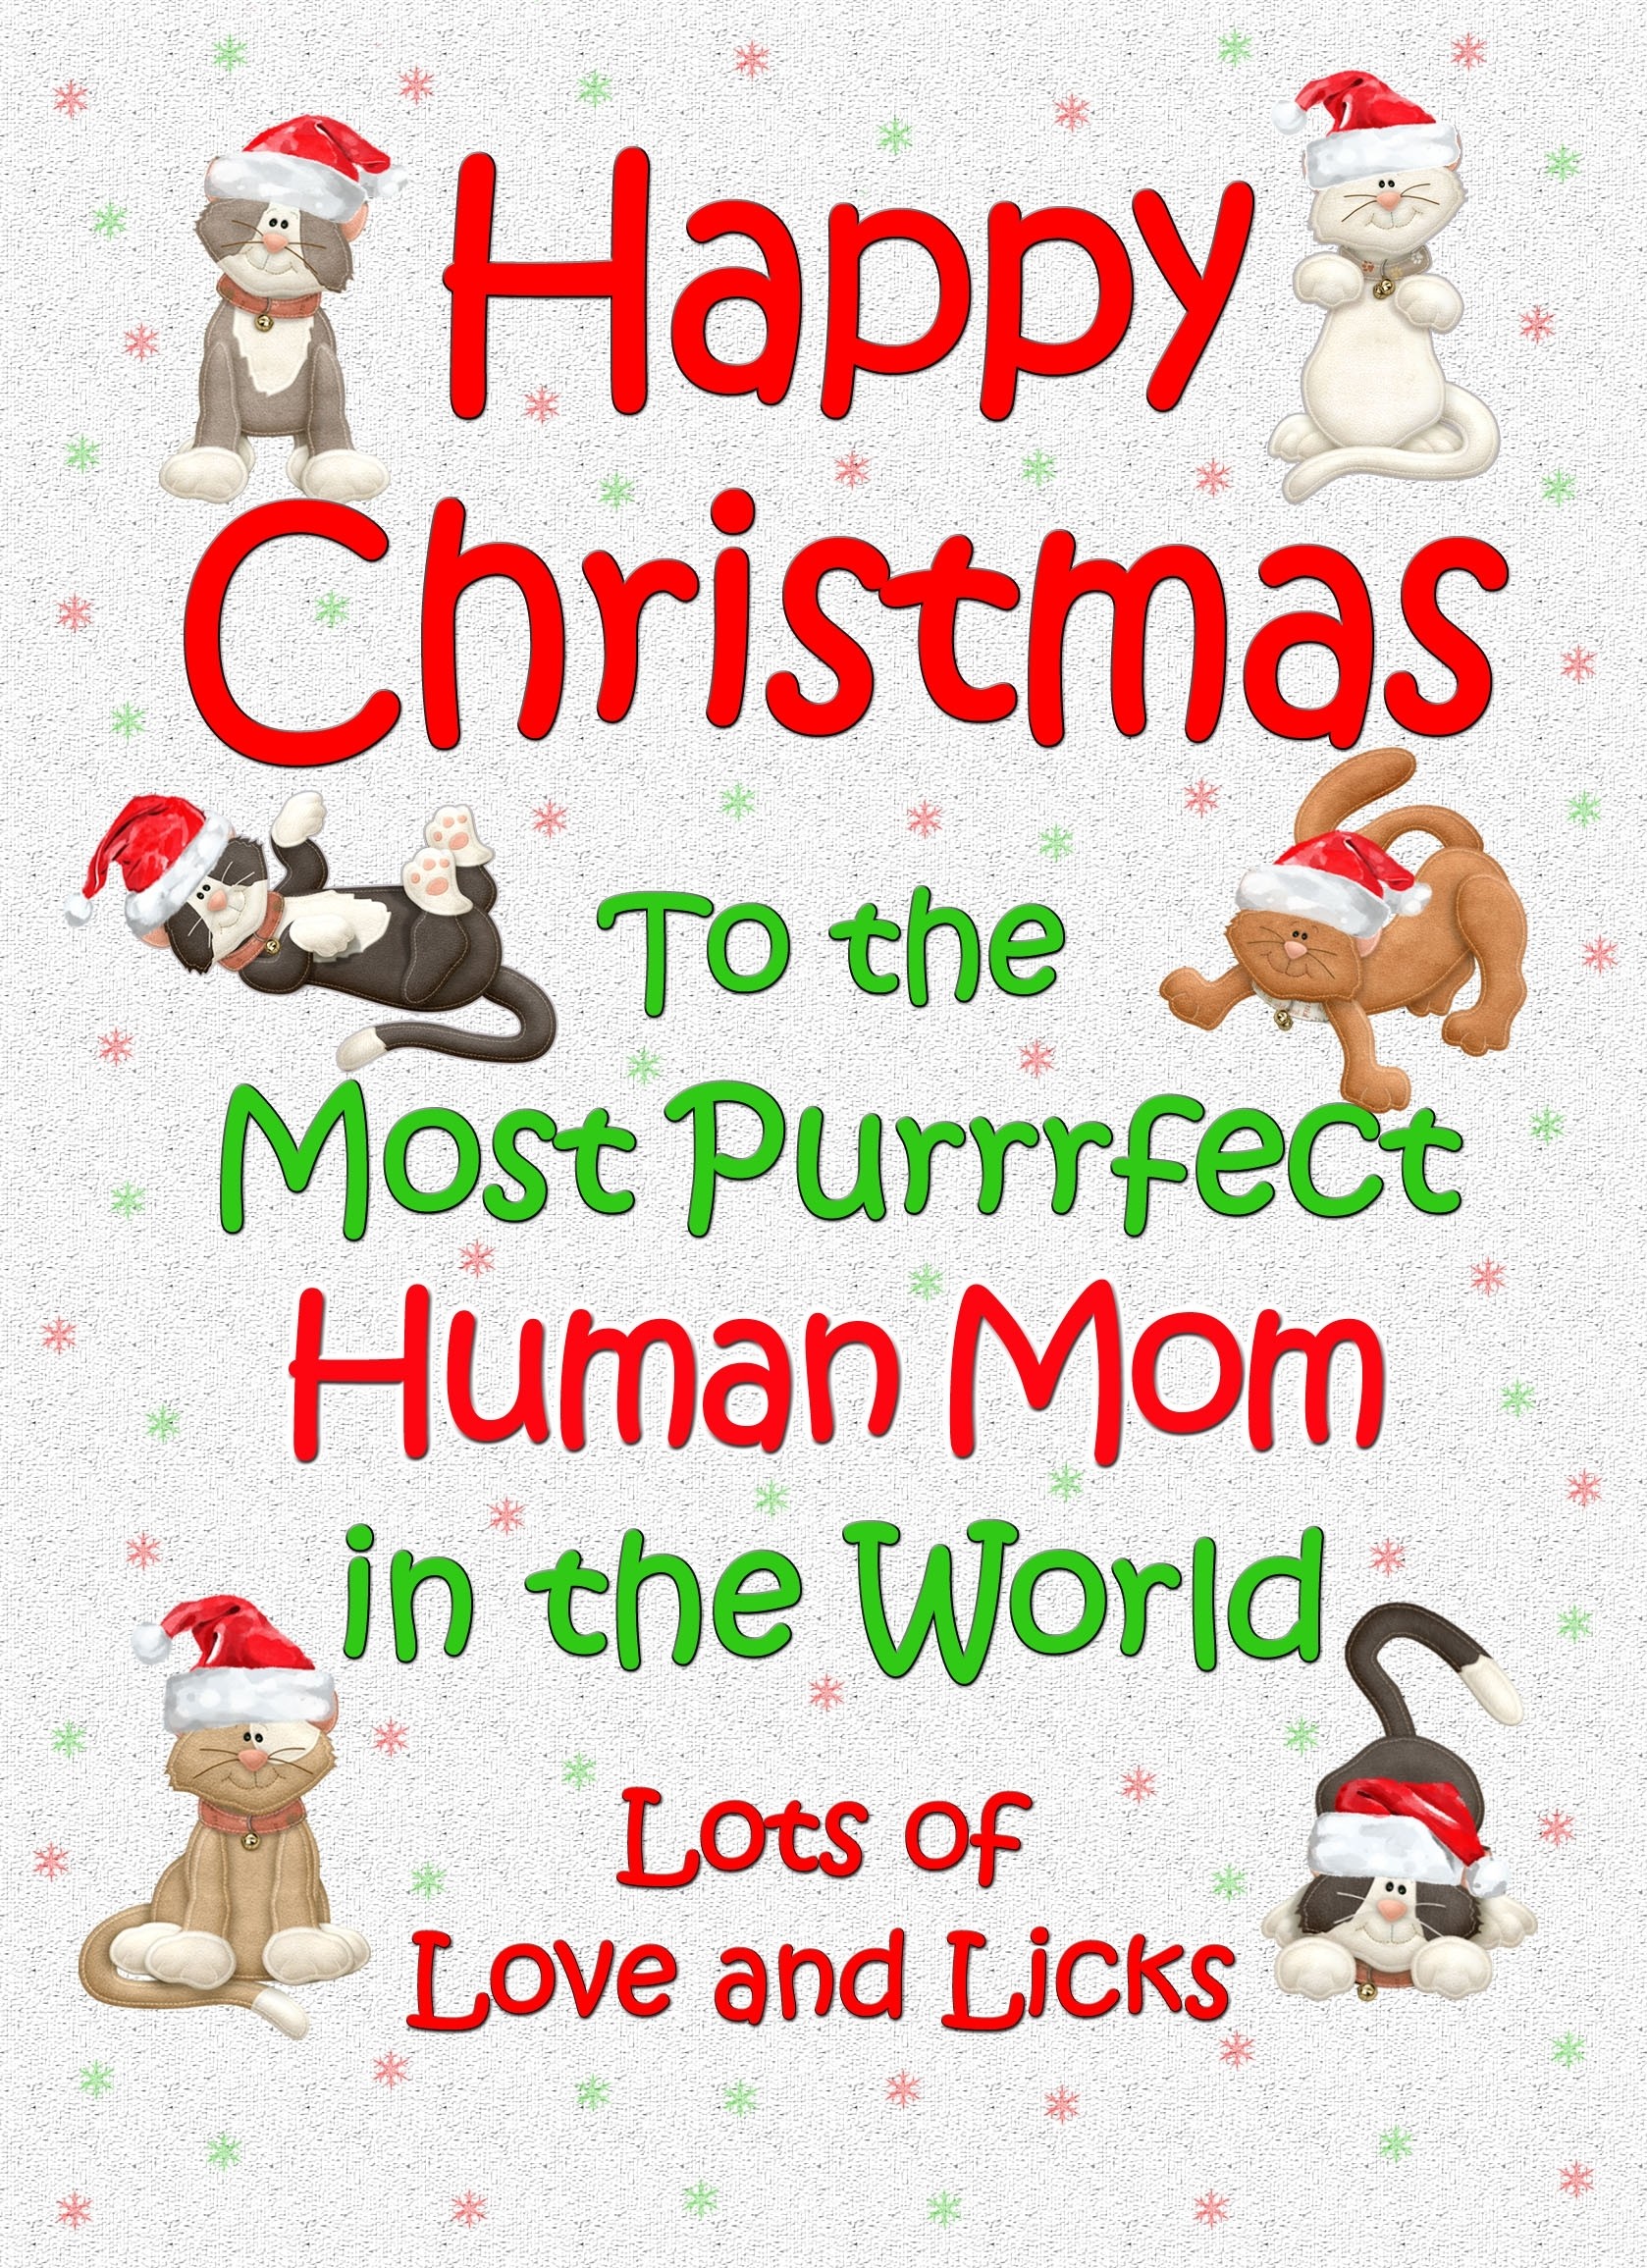 From the Cat Christmas Card (Human Mom, White)